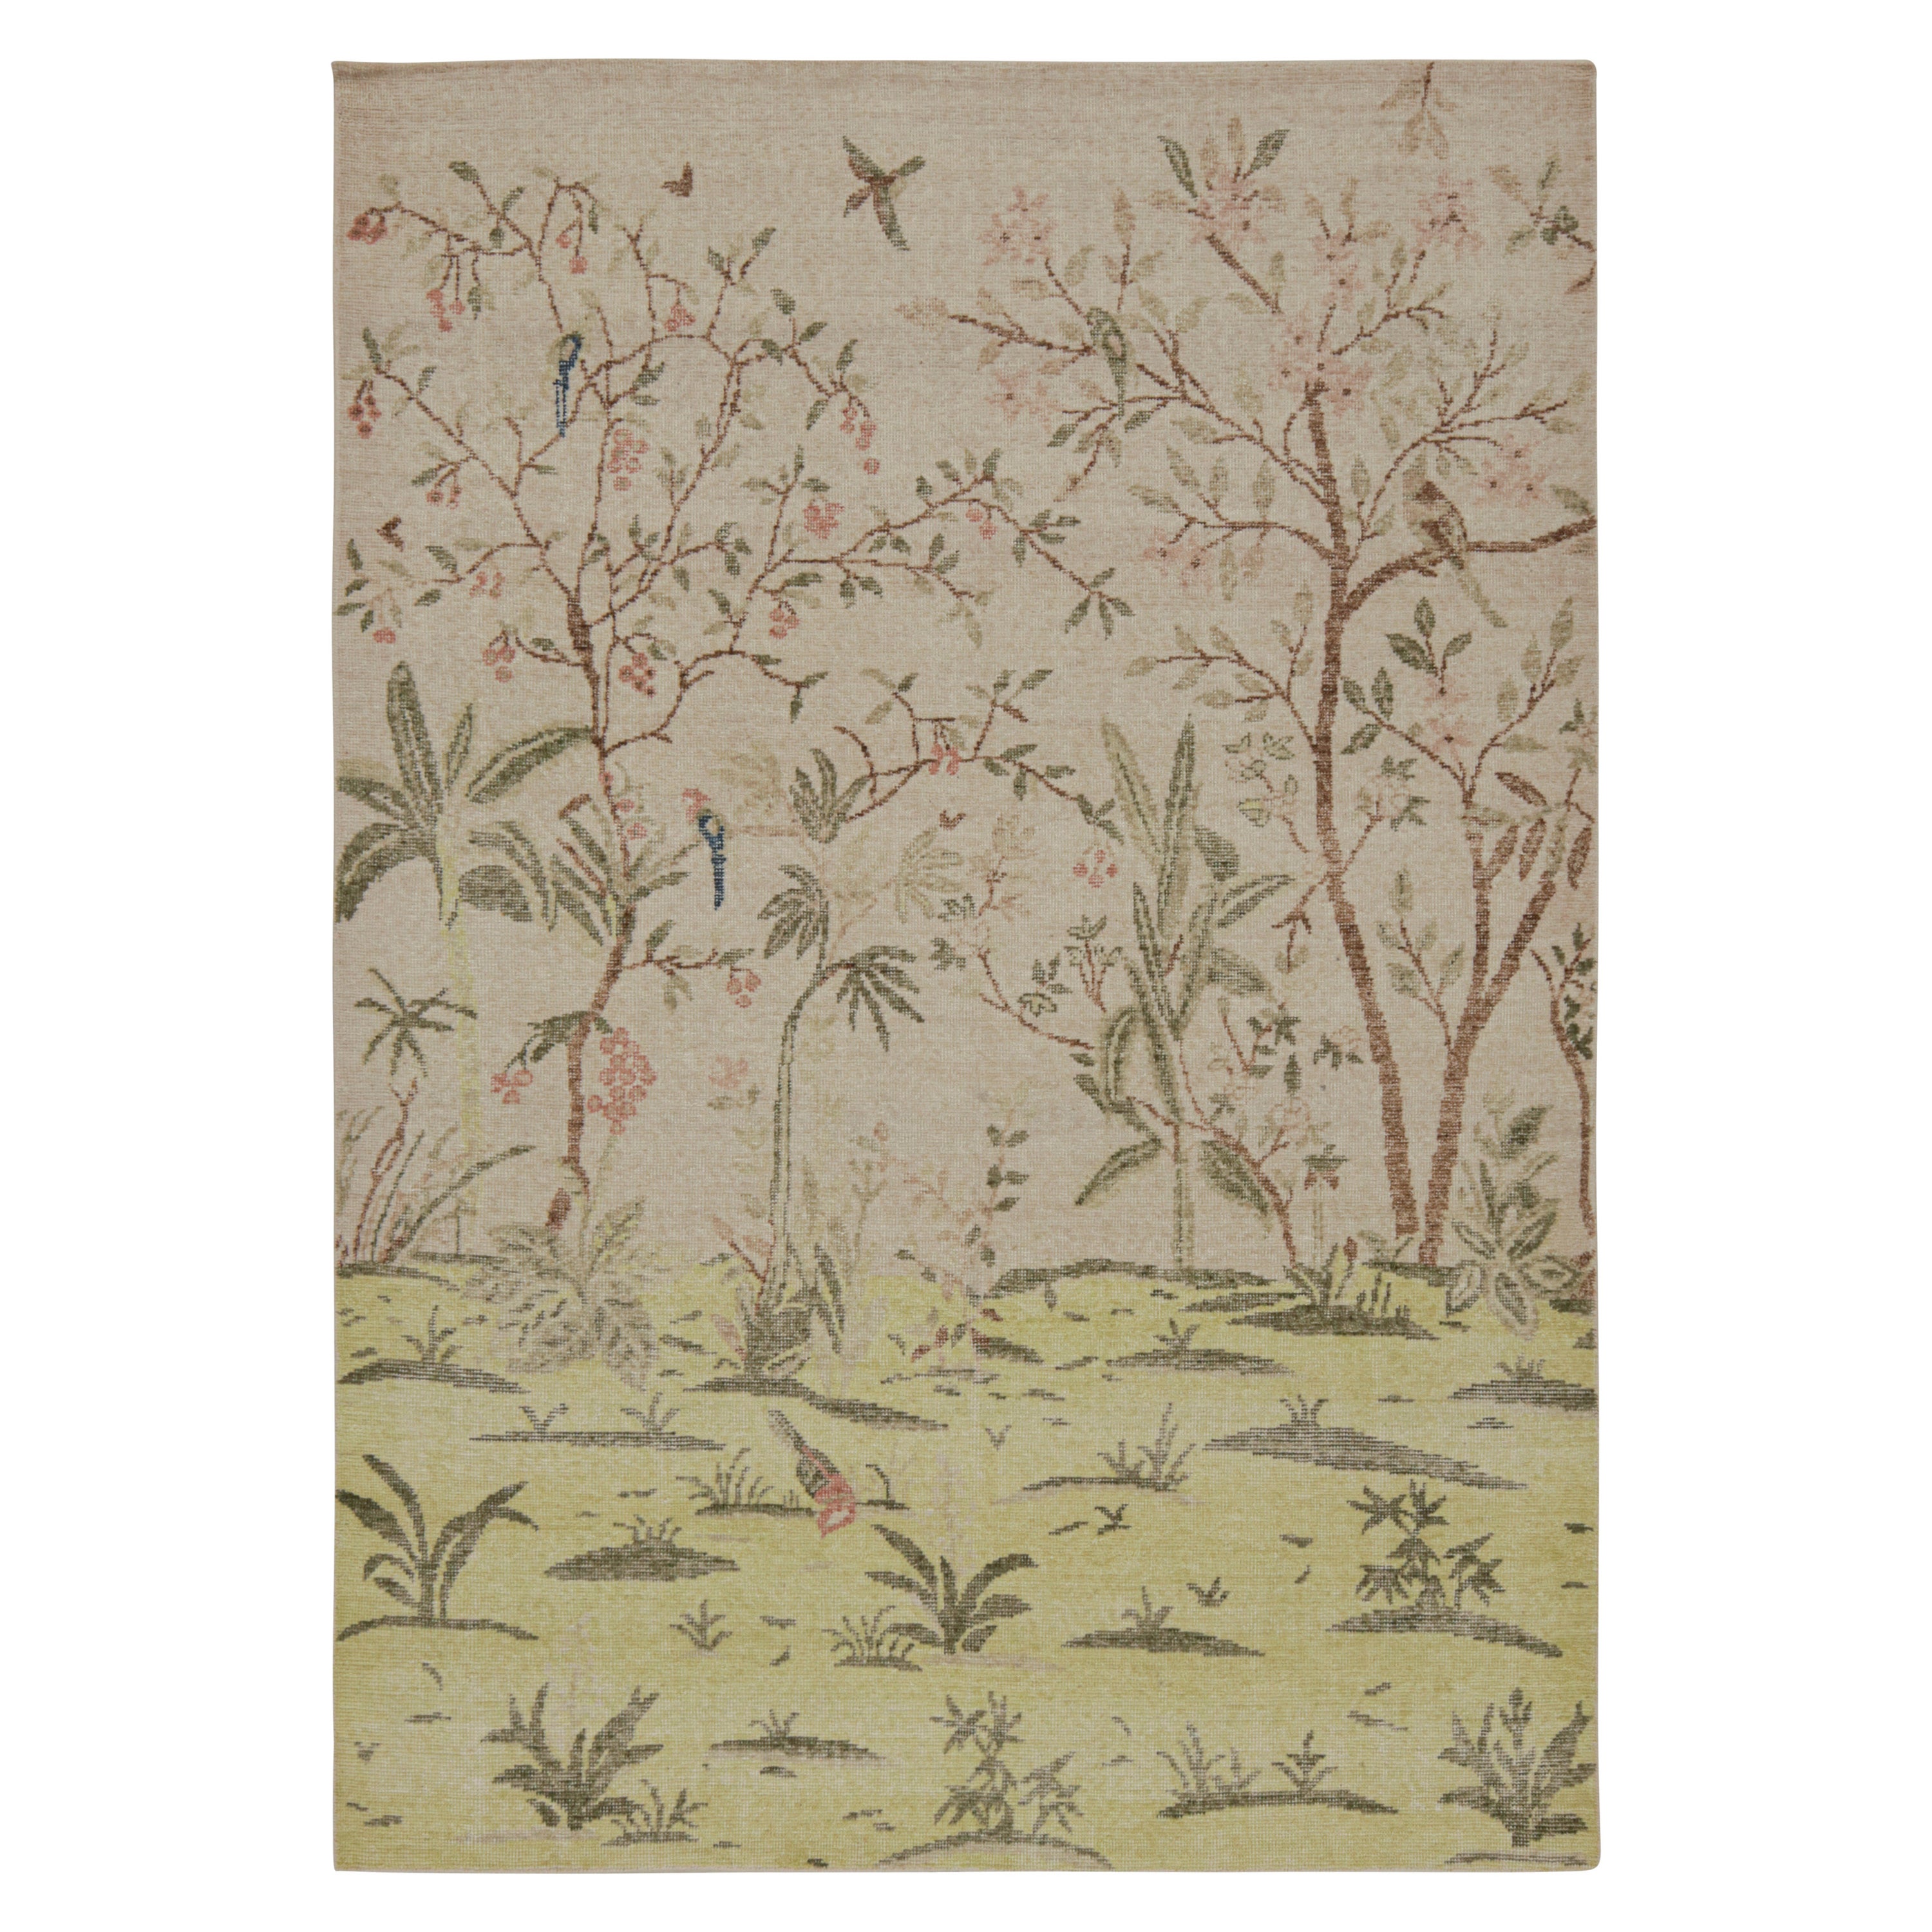 Rug & Kilim’s Contemporary Distressed Pictorial Rug, with Botanical Depictions